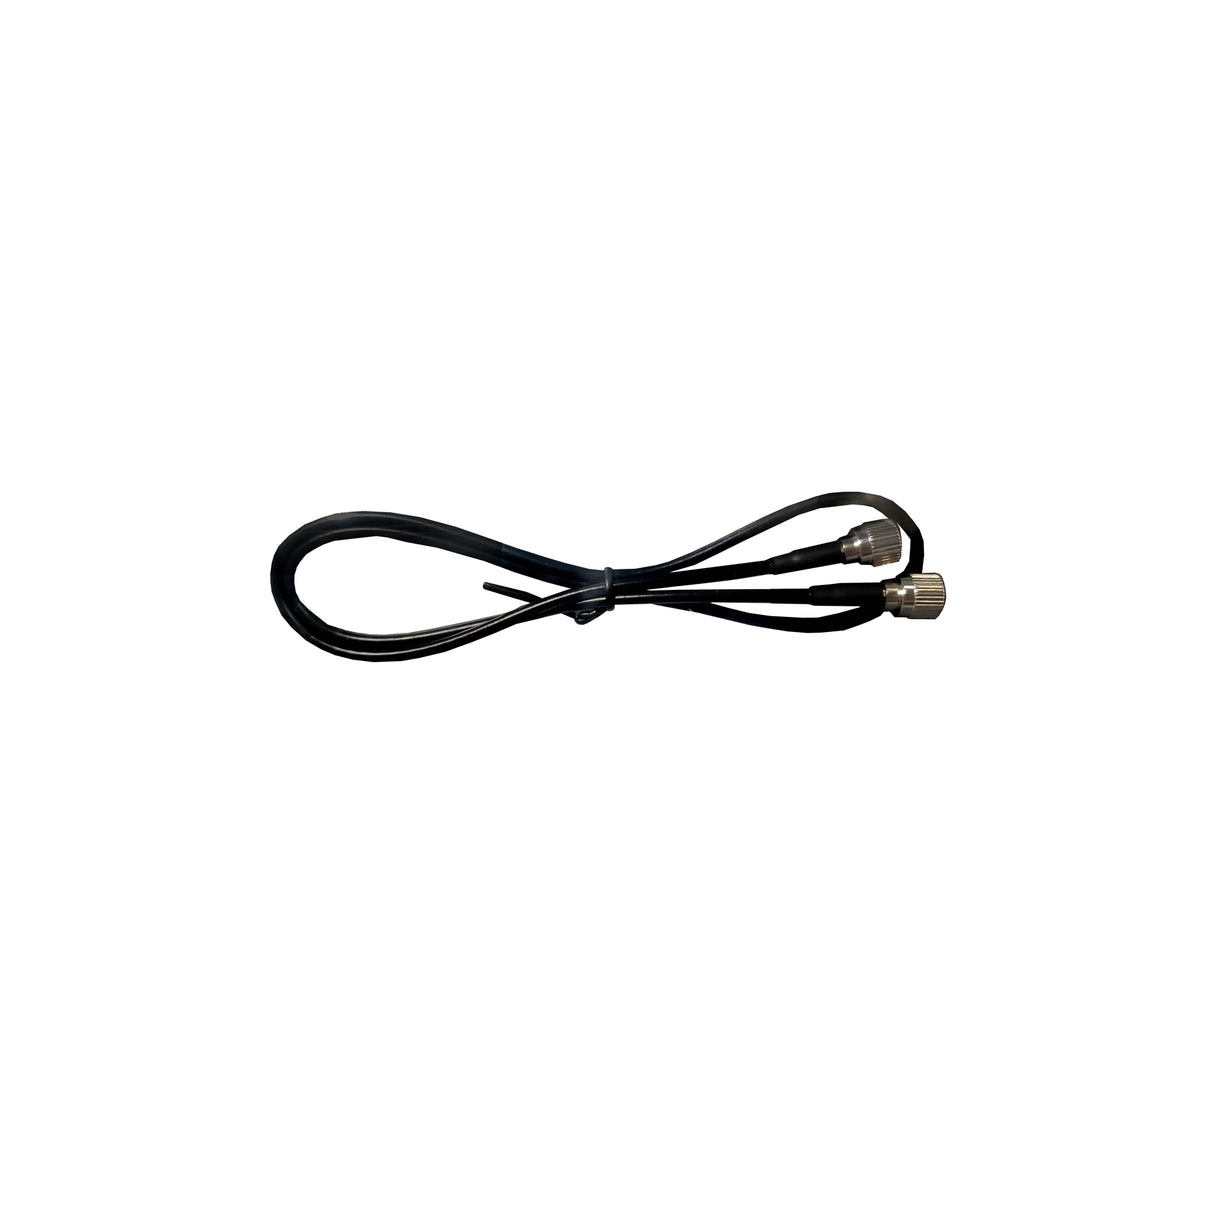 Shure 95A31216 55cm Antenna Cable for GLXD Wireless Systems